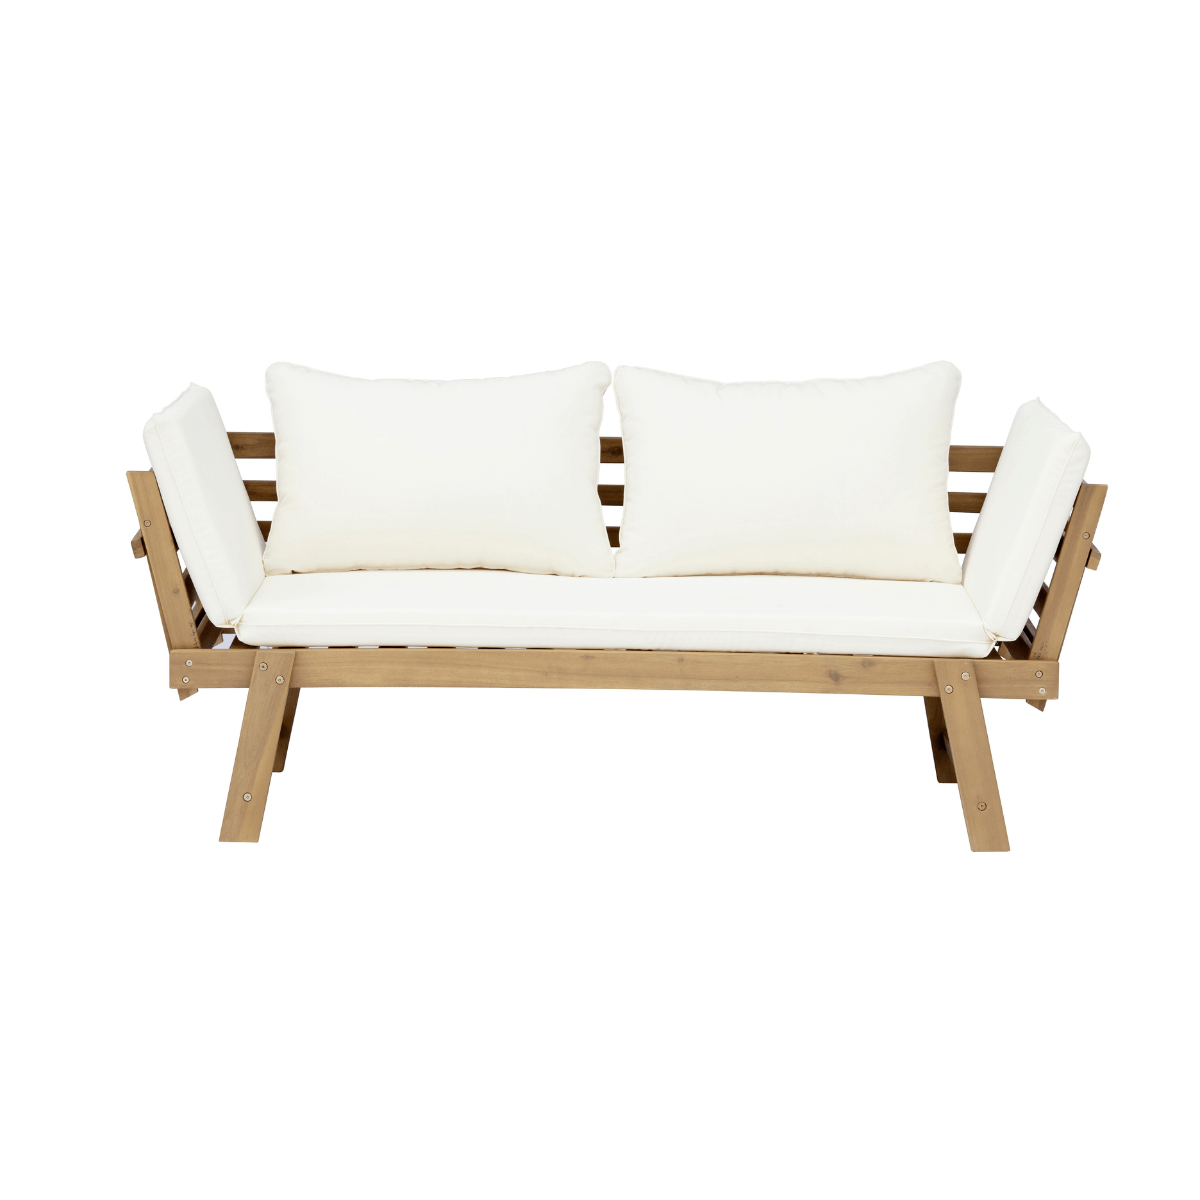 Cora Wooden Outdoor DayBed-Upinteriors